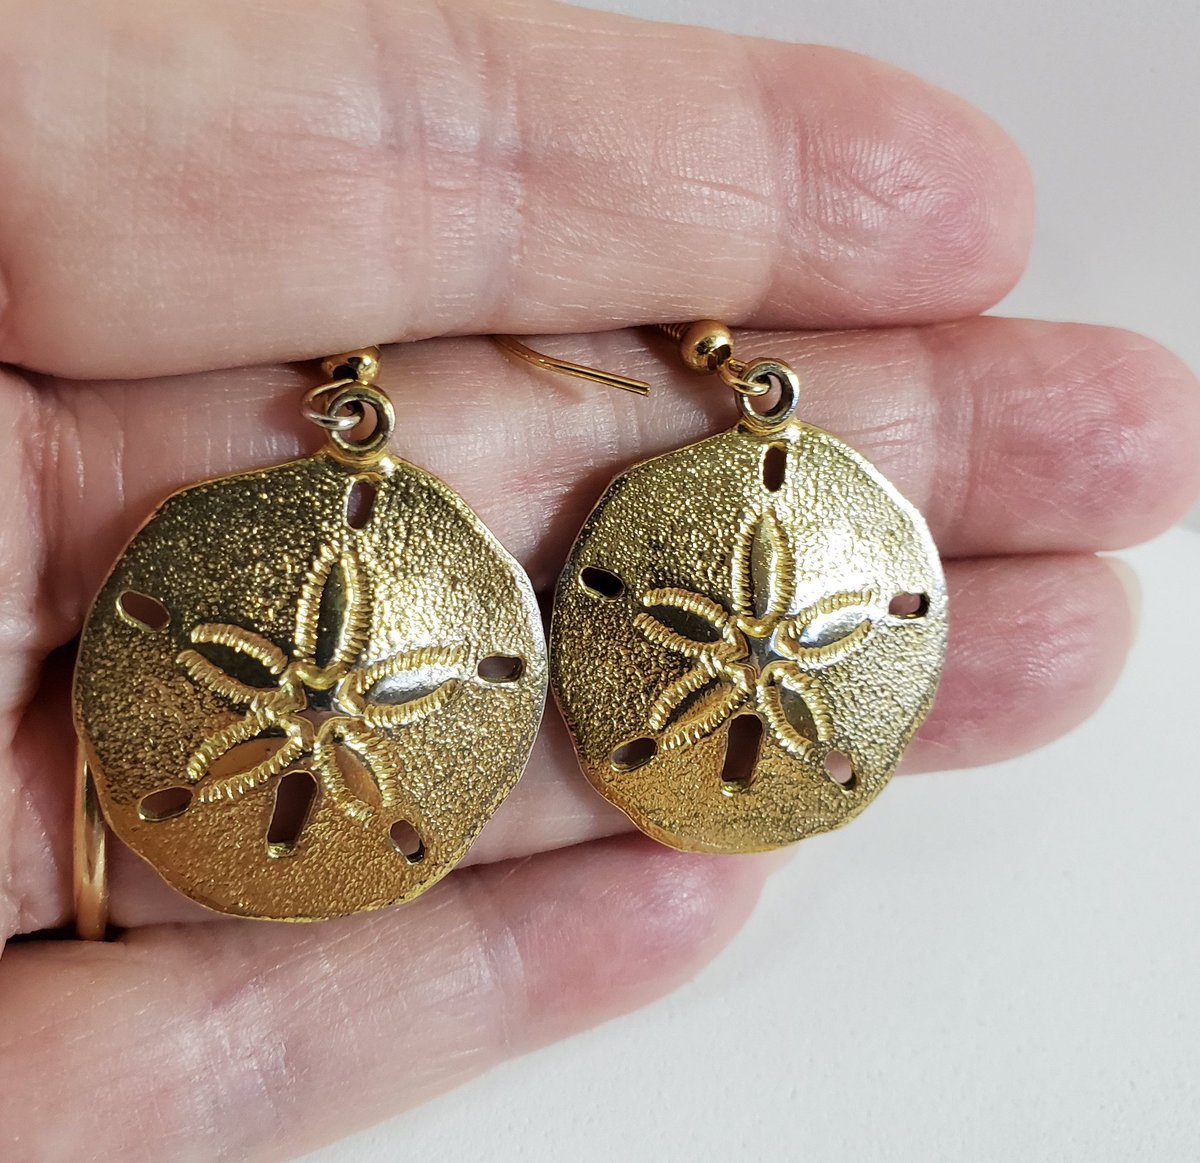 Excited to share the latest addition to my #etsy shop: Earrings Sand Dollar Dangle Style Gold Plated Handmade Jewelry Nautical Earrings Gifts For Her Fashion Earrings Everyday Earrings #women #earlobe #earwire #gold #sanddollarearrings etsy.me/2A3Dgem